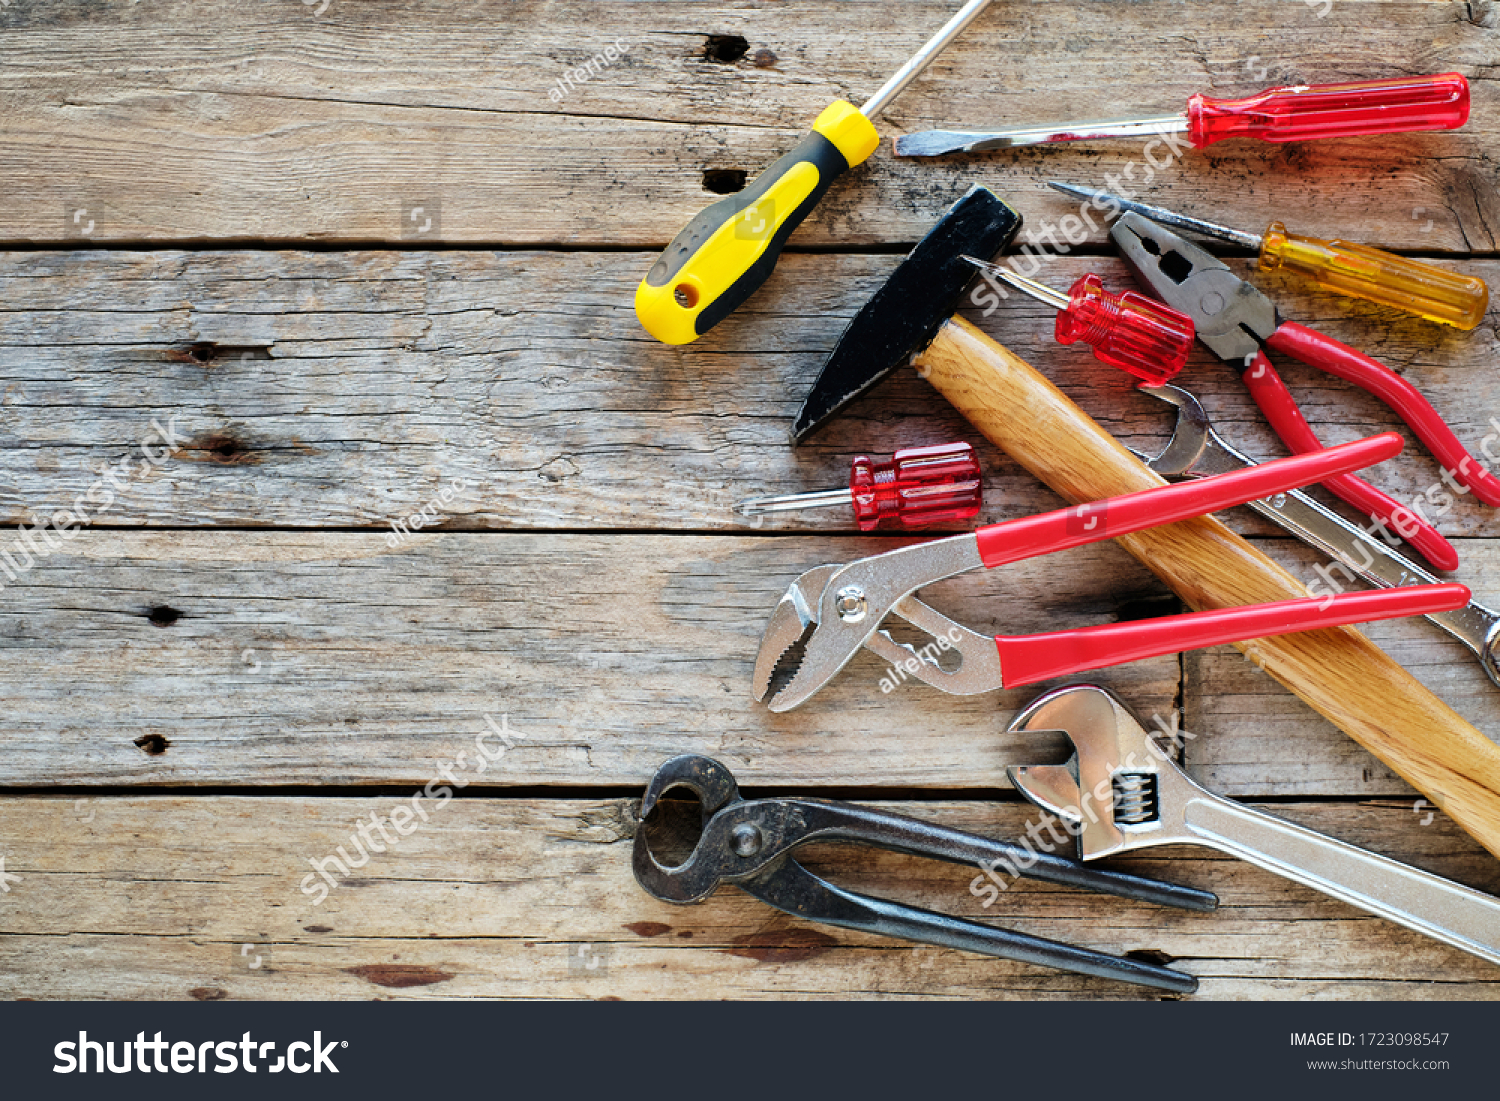 Background of various construction tools #1723098547